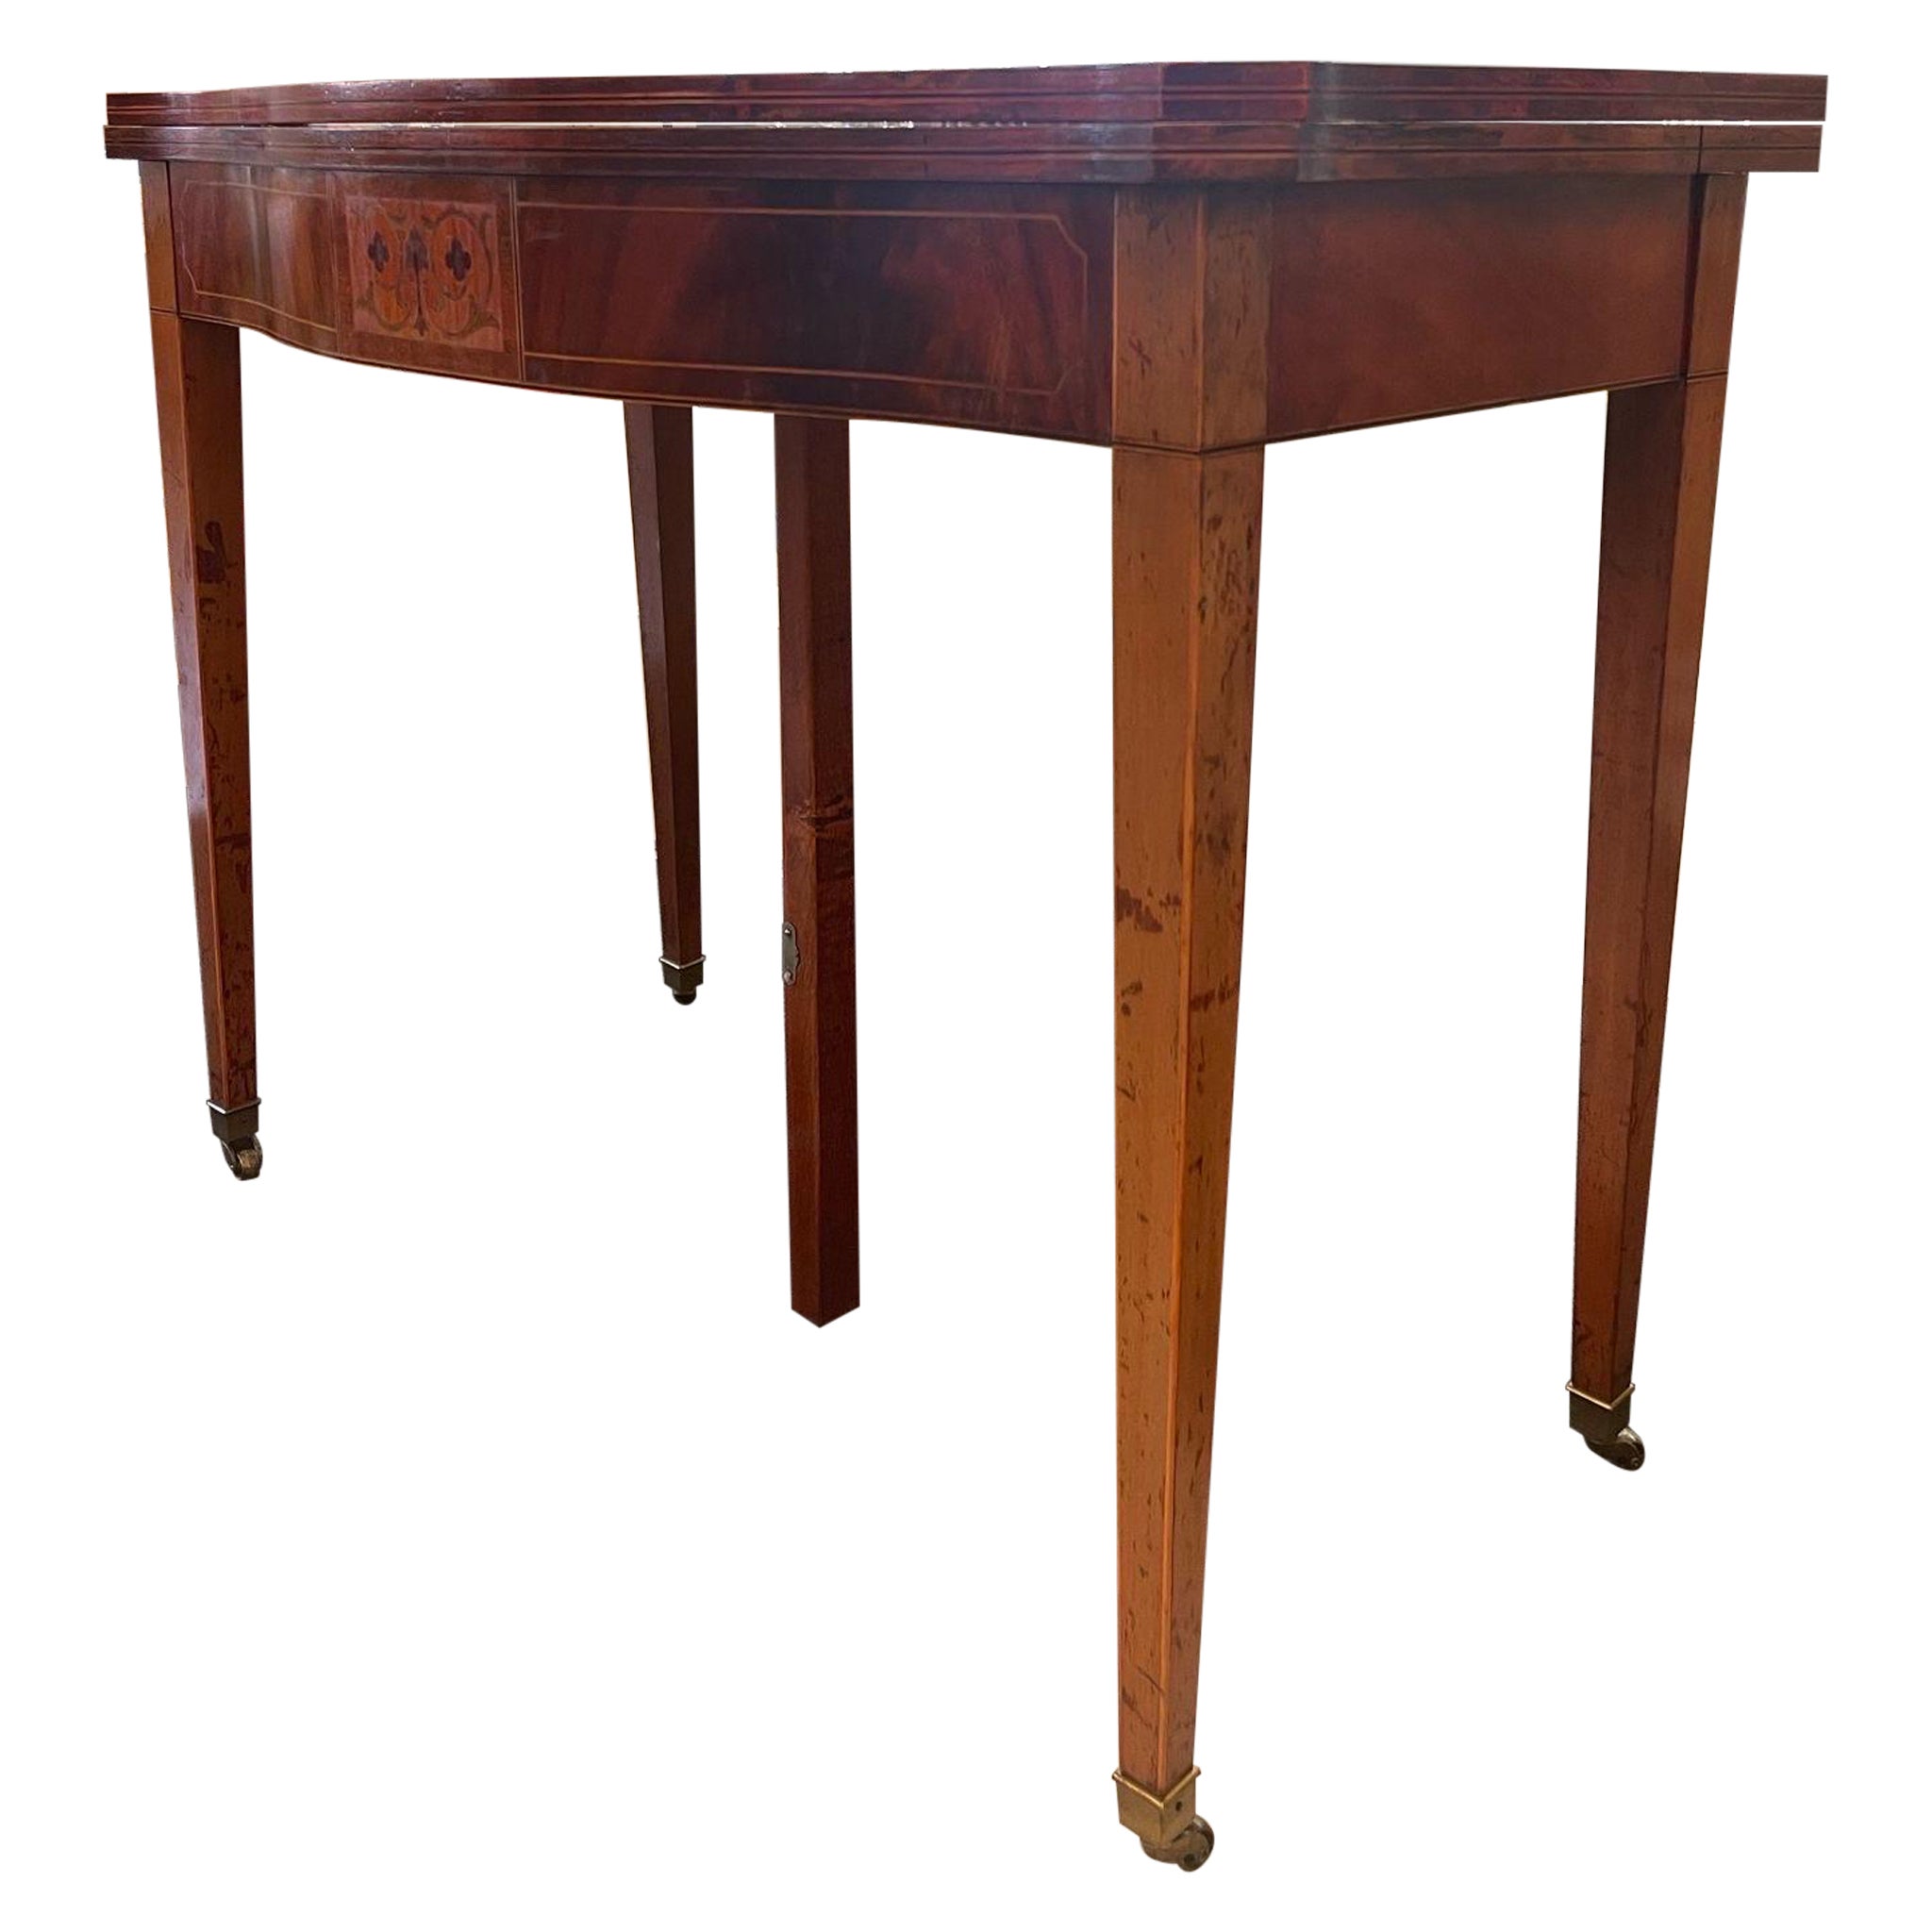 Vintage Wooden Extending Dining Table With Wood Inlay Accents. For Sale